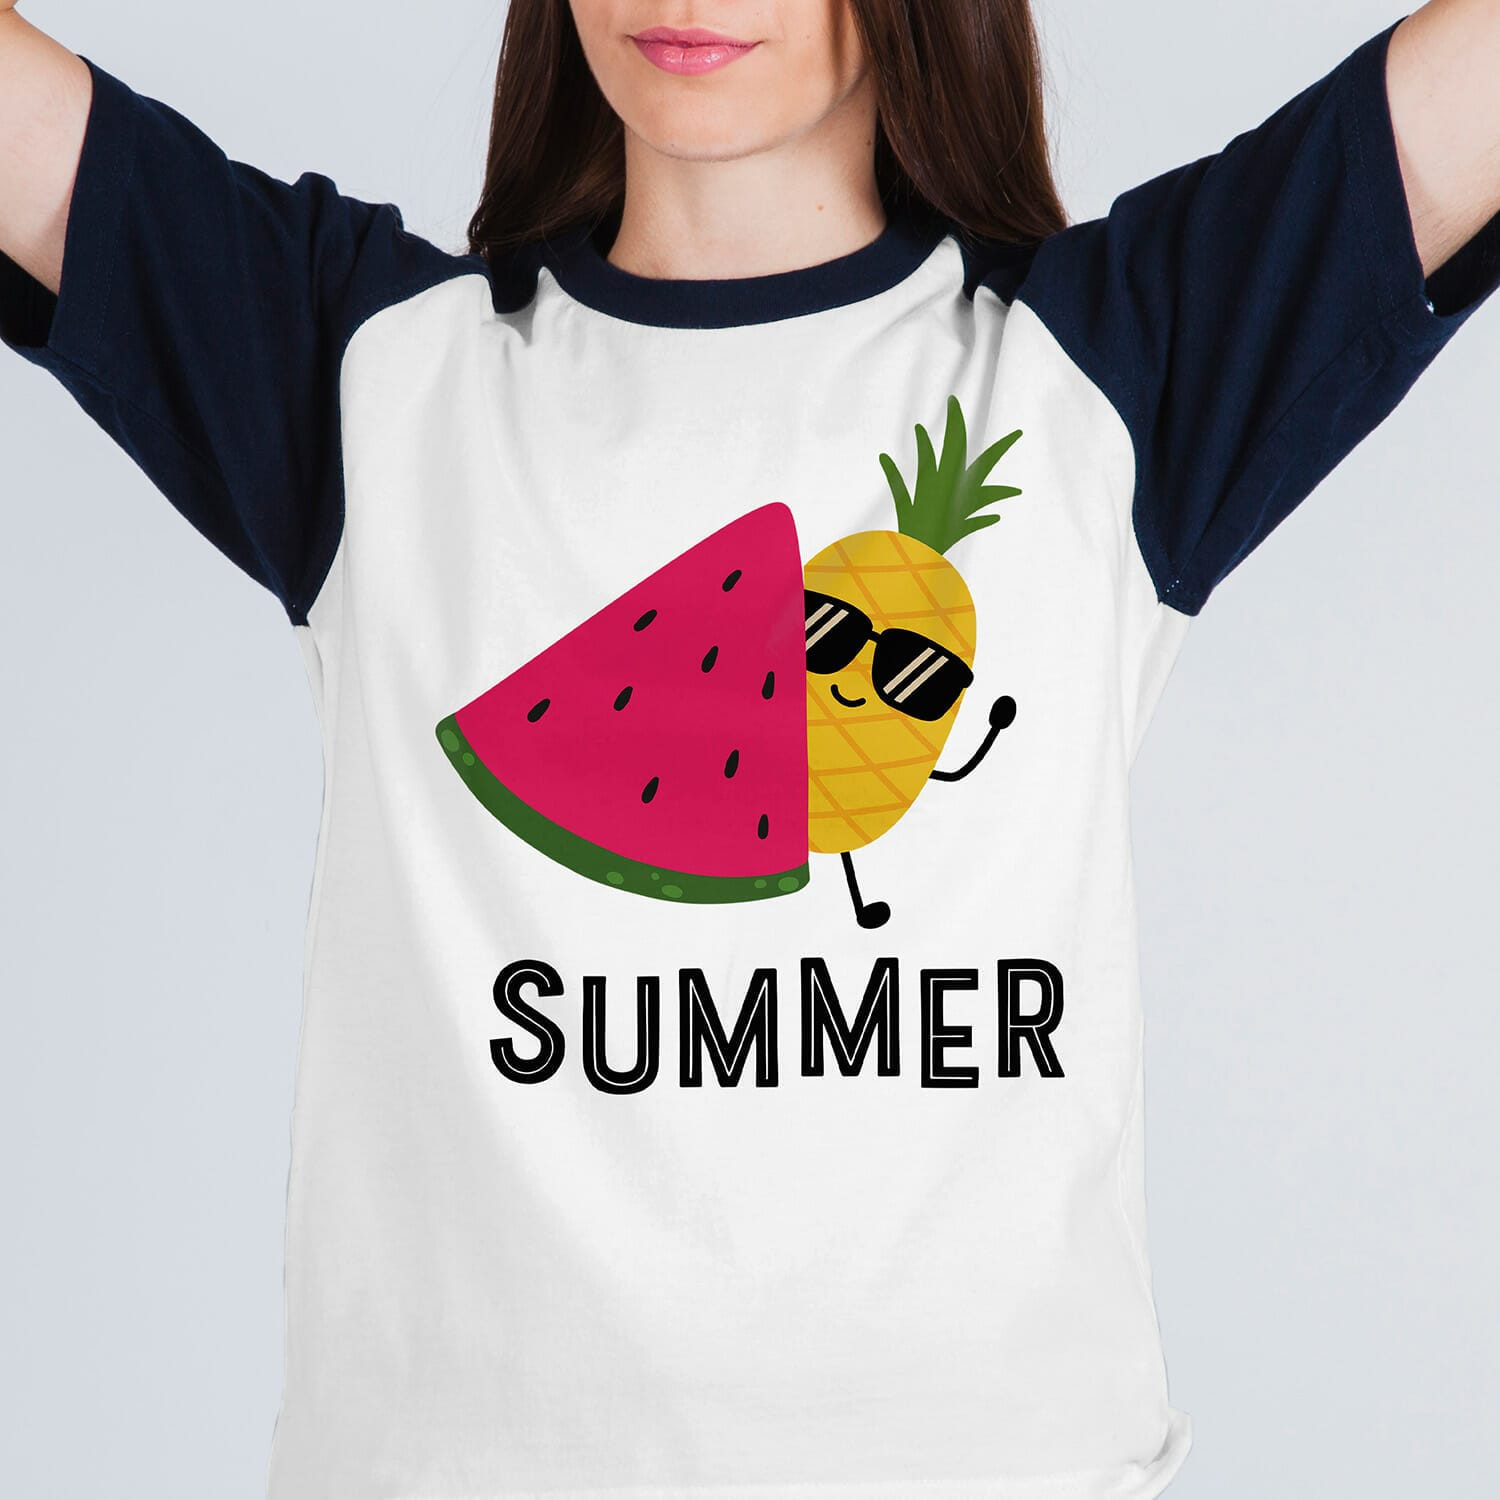 Watermelon And Pineapple T-Shirt Design For Summer